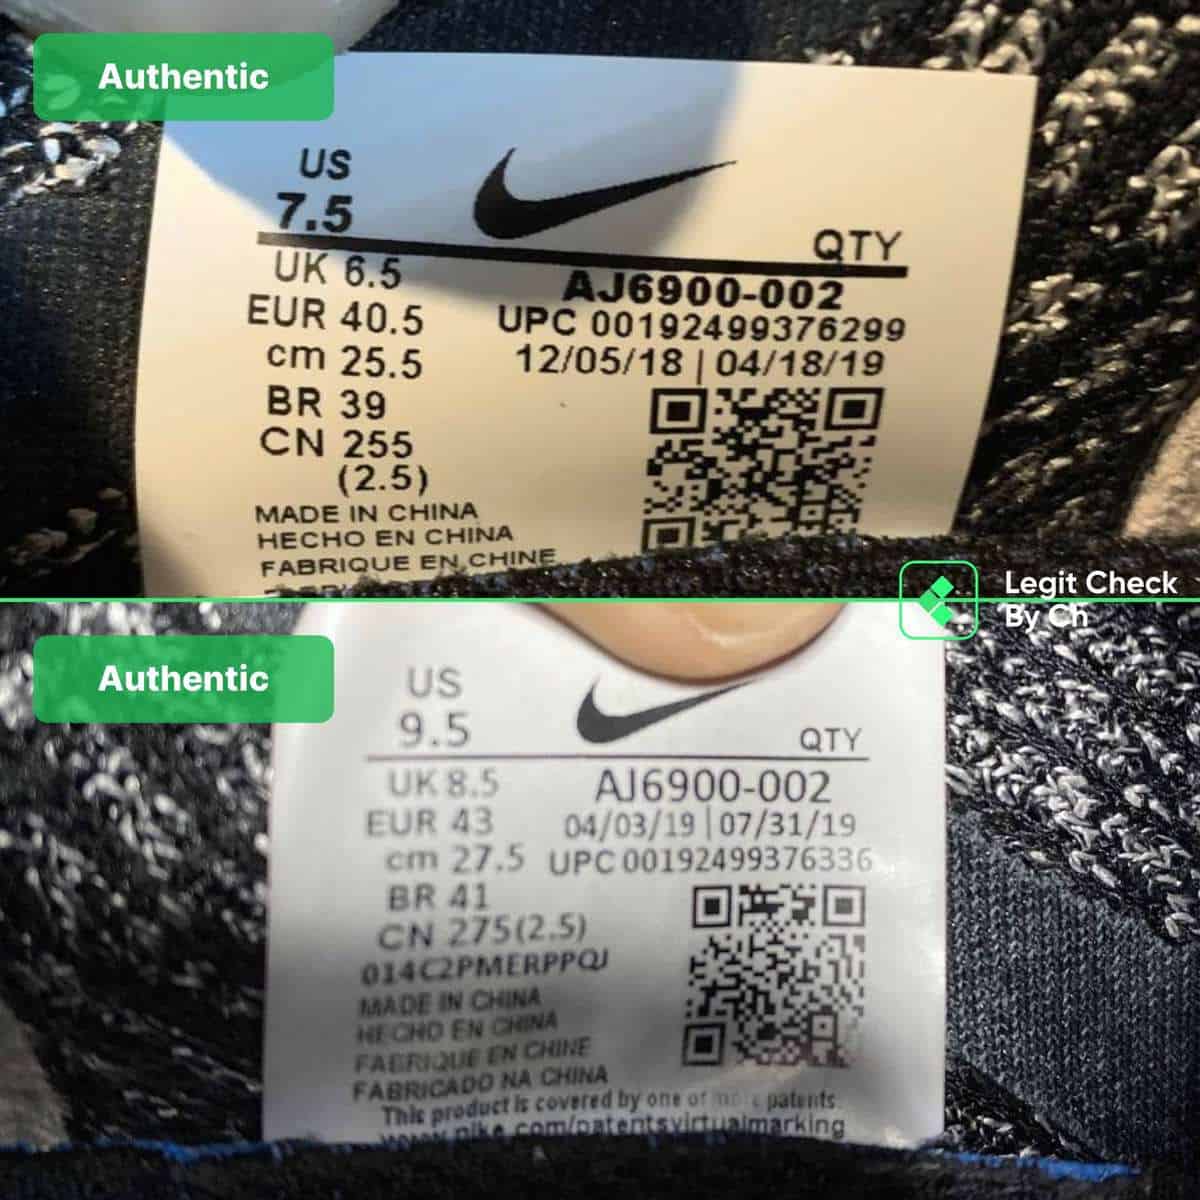 ammunition Vend tilbage træthed How To Spot Any Fake Nike Air VaporMax (2023) - Legit Check